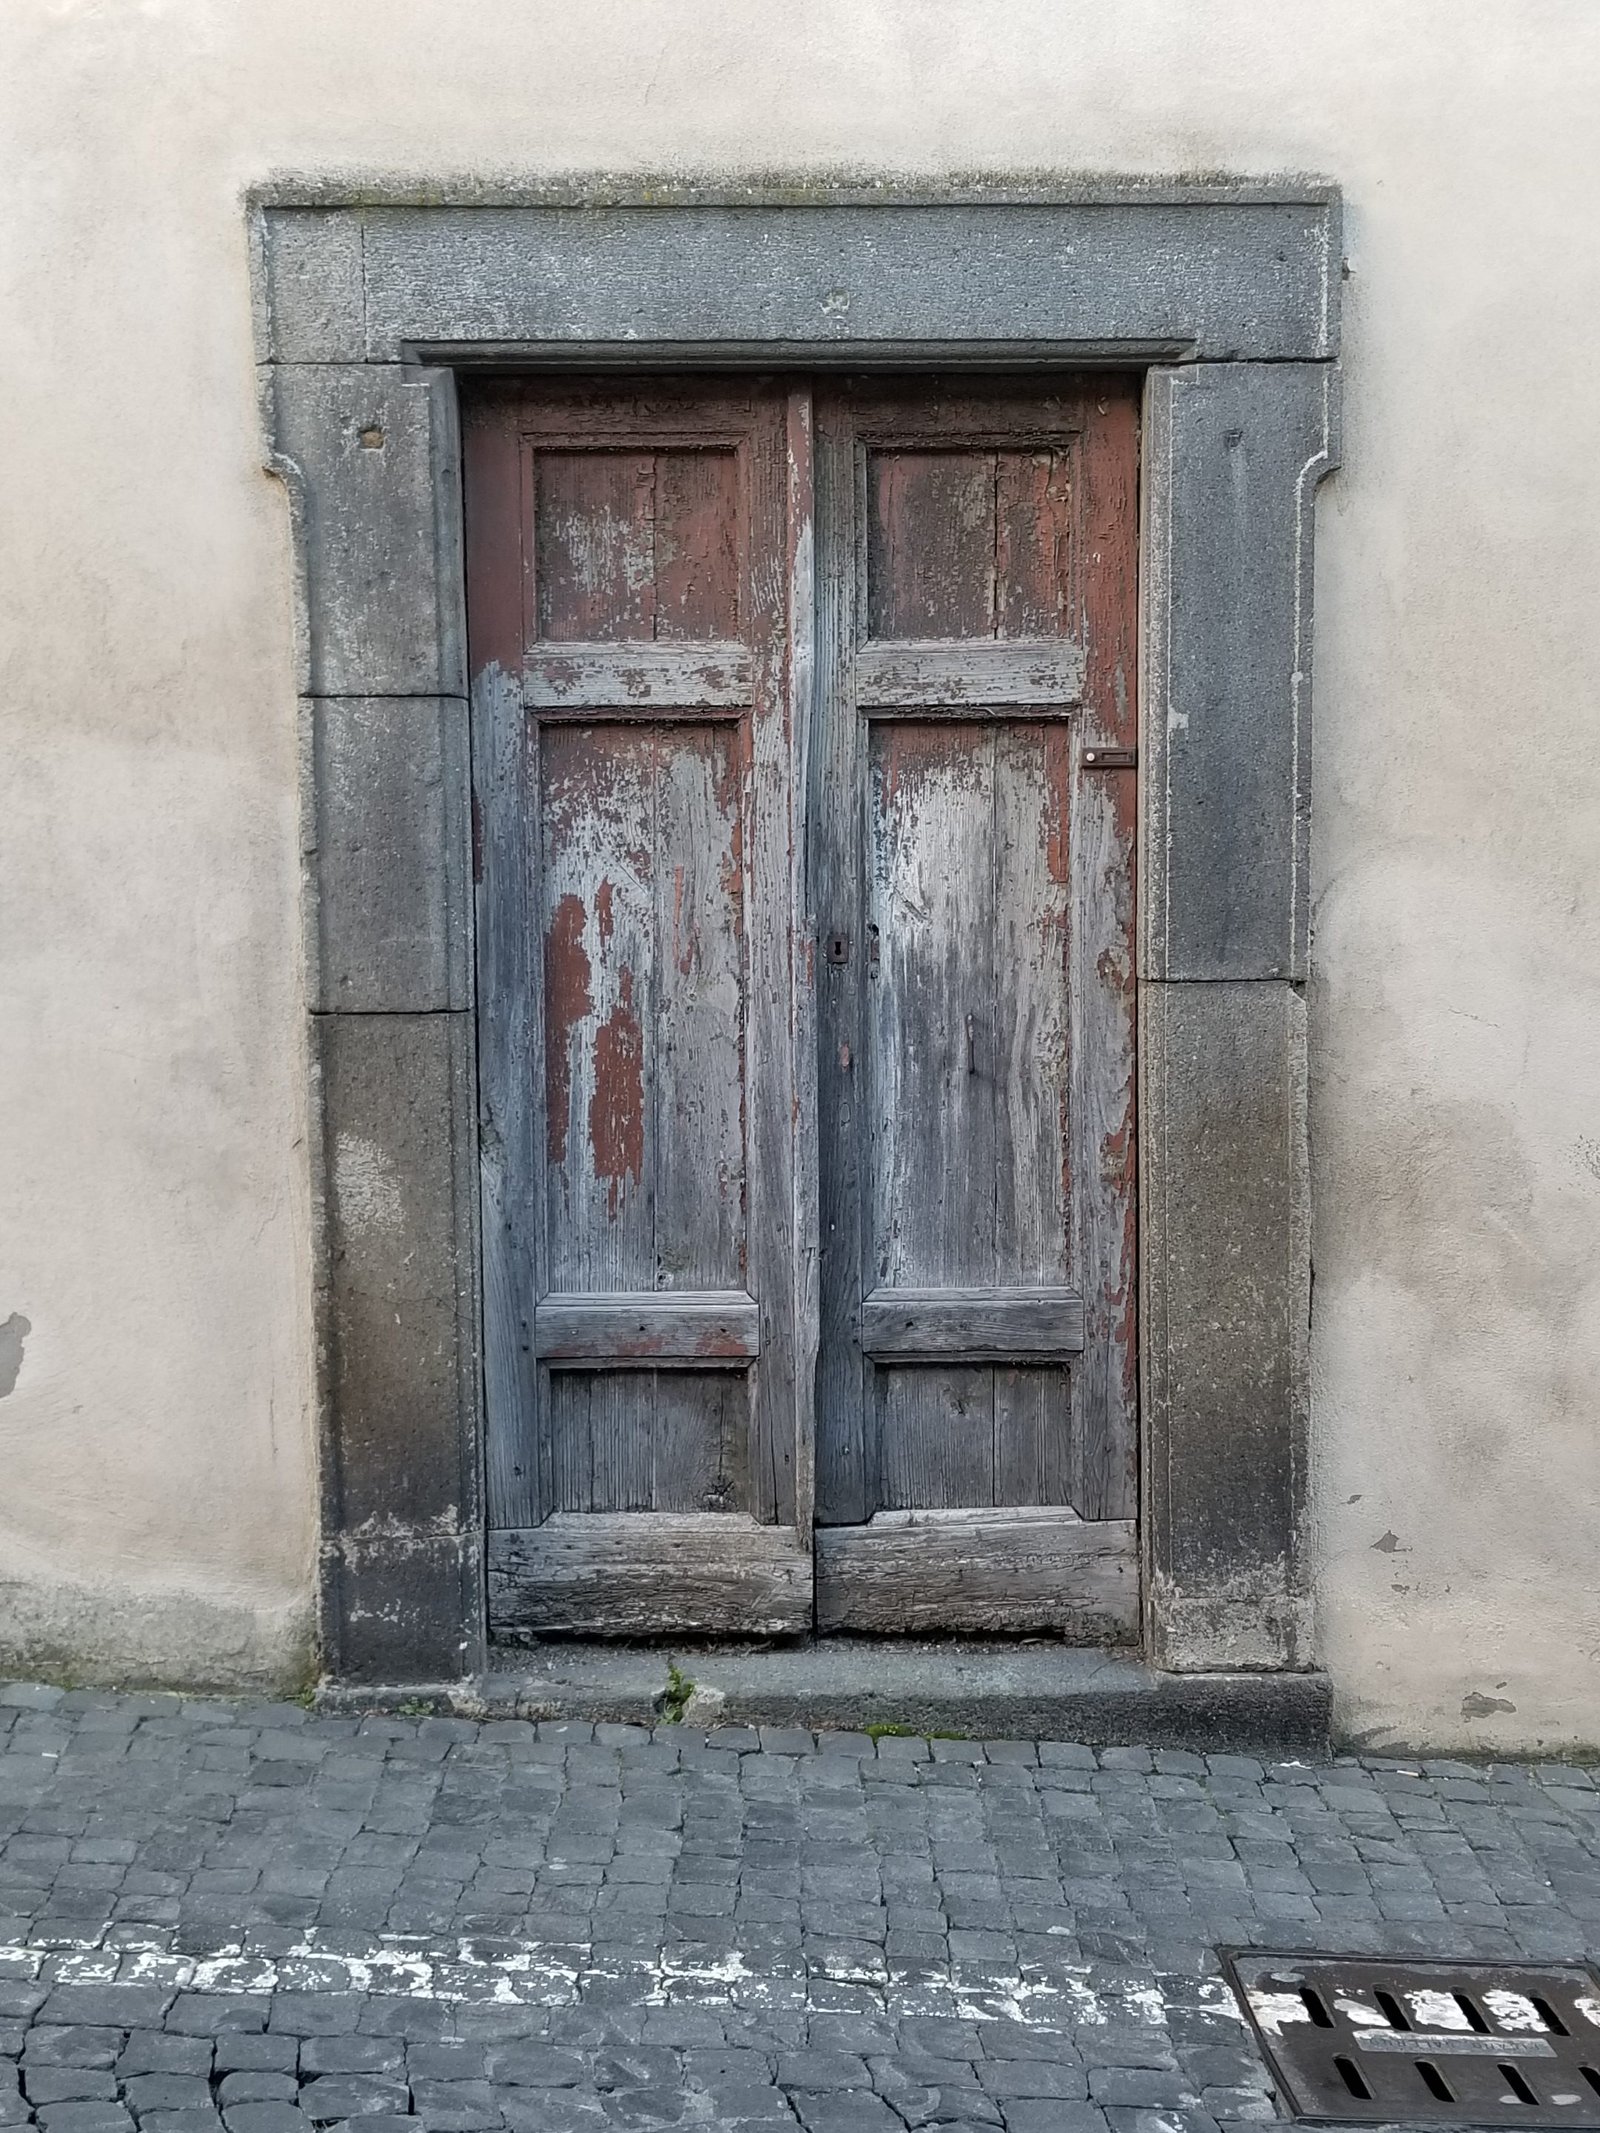 wooden doors, Discover the old Etruscan city and its hidden treasures in Orvieto, ouritalianjourney.com